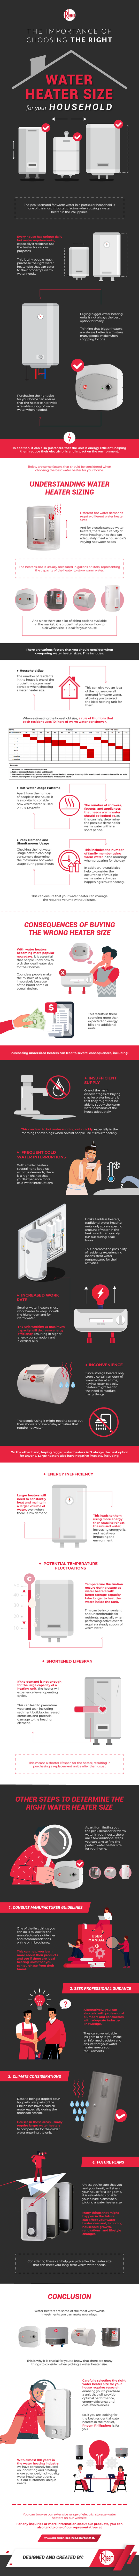 The_Importance_of_Choosing_the_Right_Water_Heater_Size_for_Your_Household-213adas